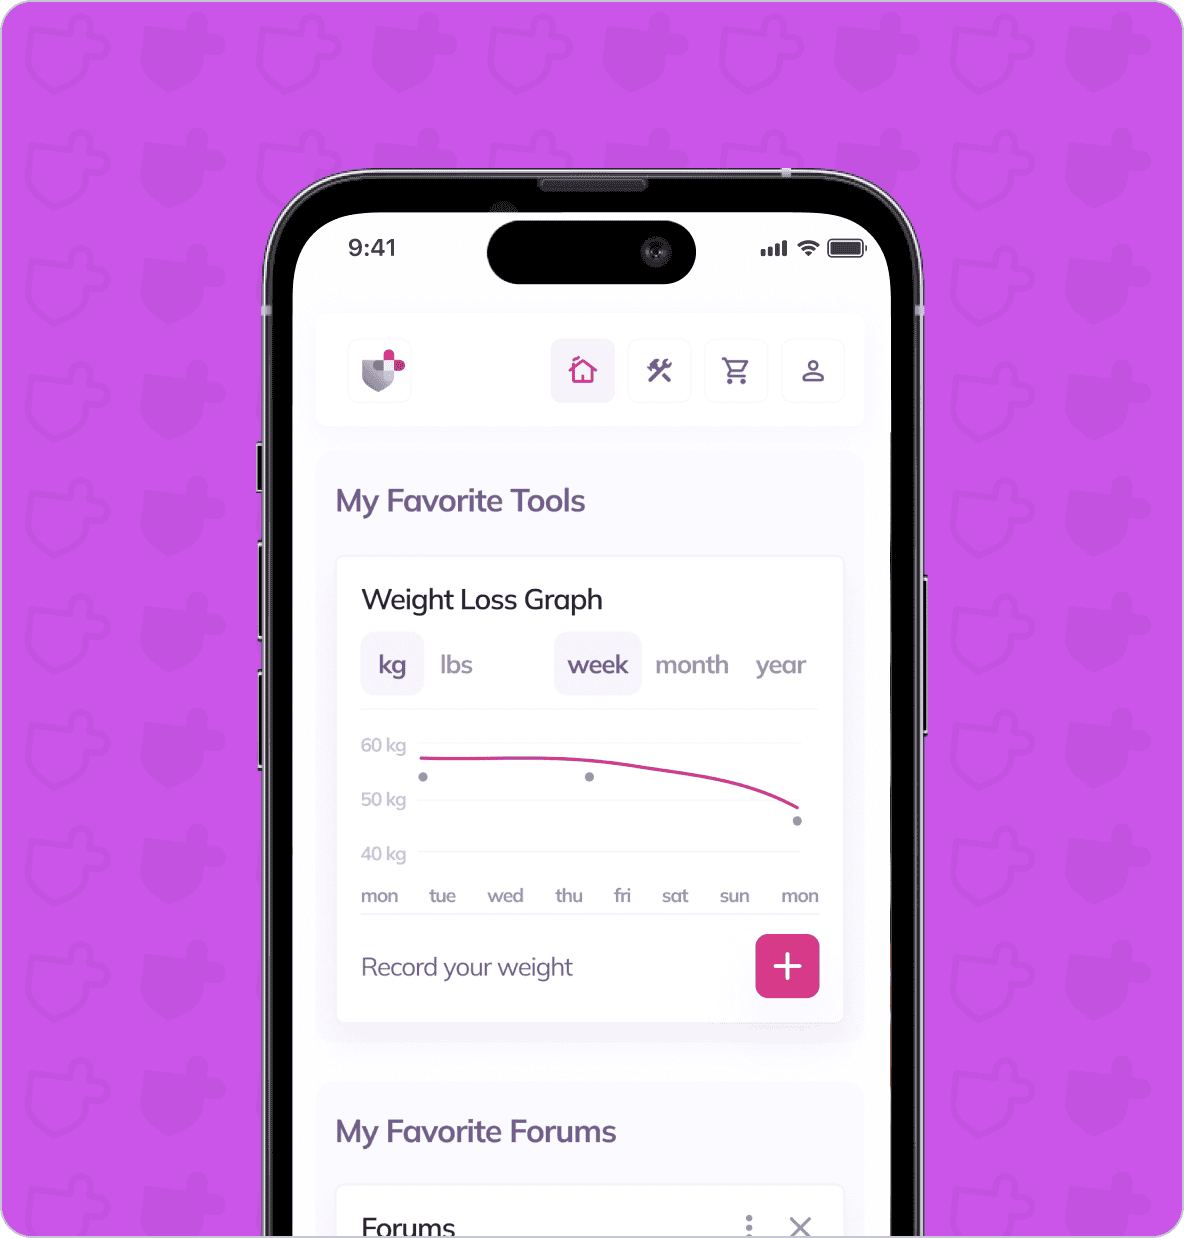 A smartphone screen displays a weight loss app showing a graph for weekly weight tracking in kg. The app interface is in white and pink colors with additional feature icons at the top.